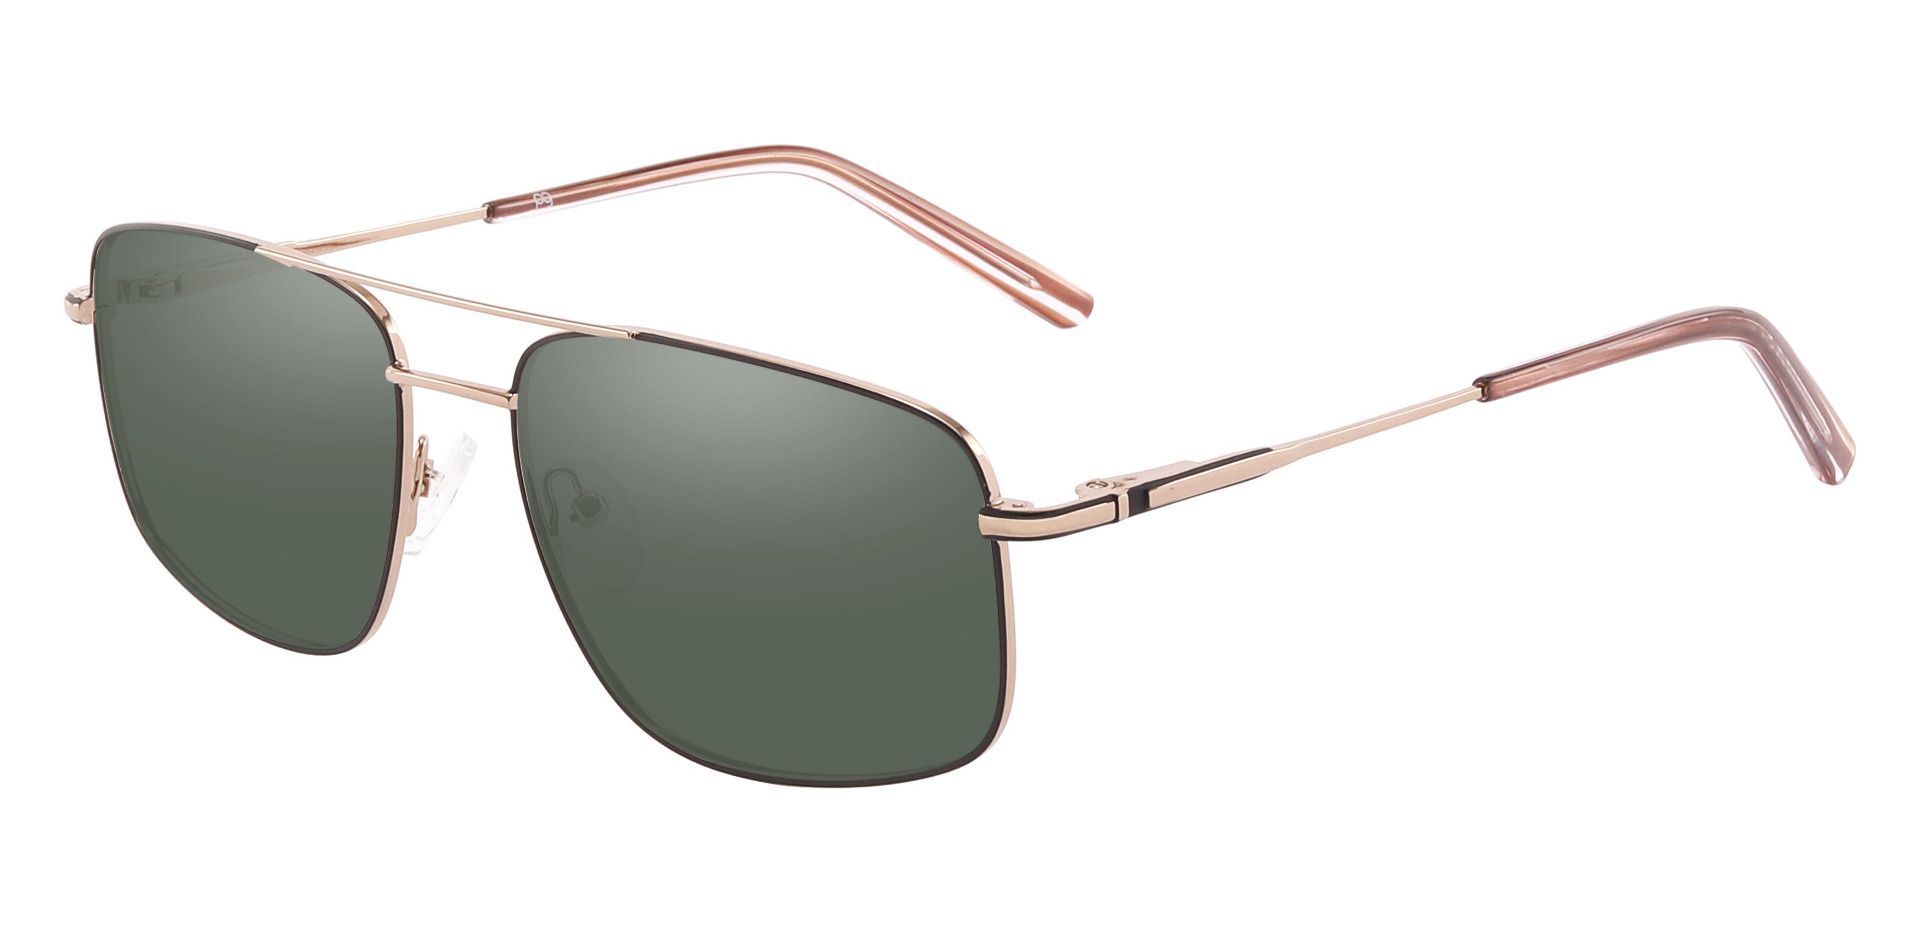 Turner Aviator Non-Rx Sunglasses - Gold Frame With Green Lenses